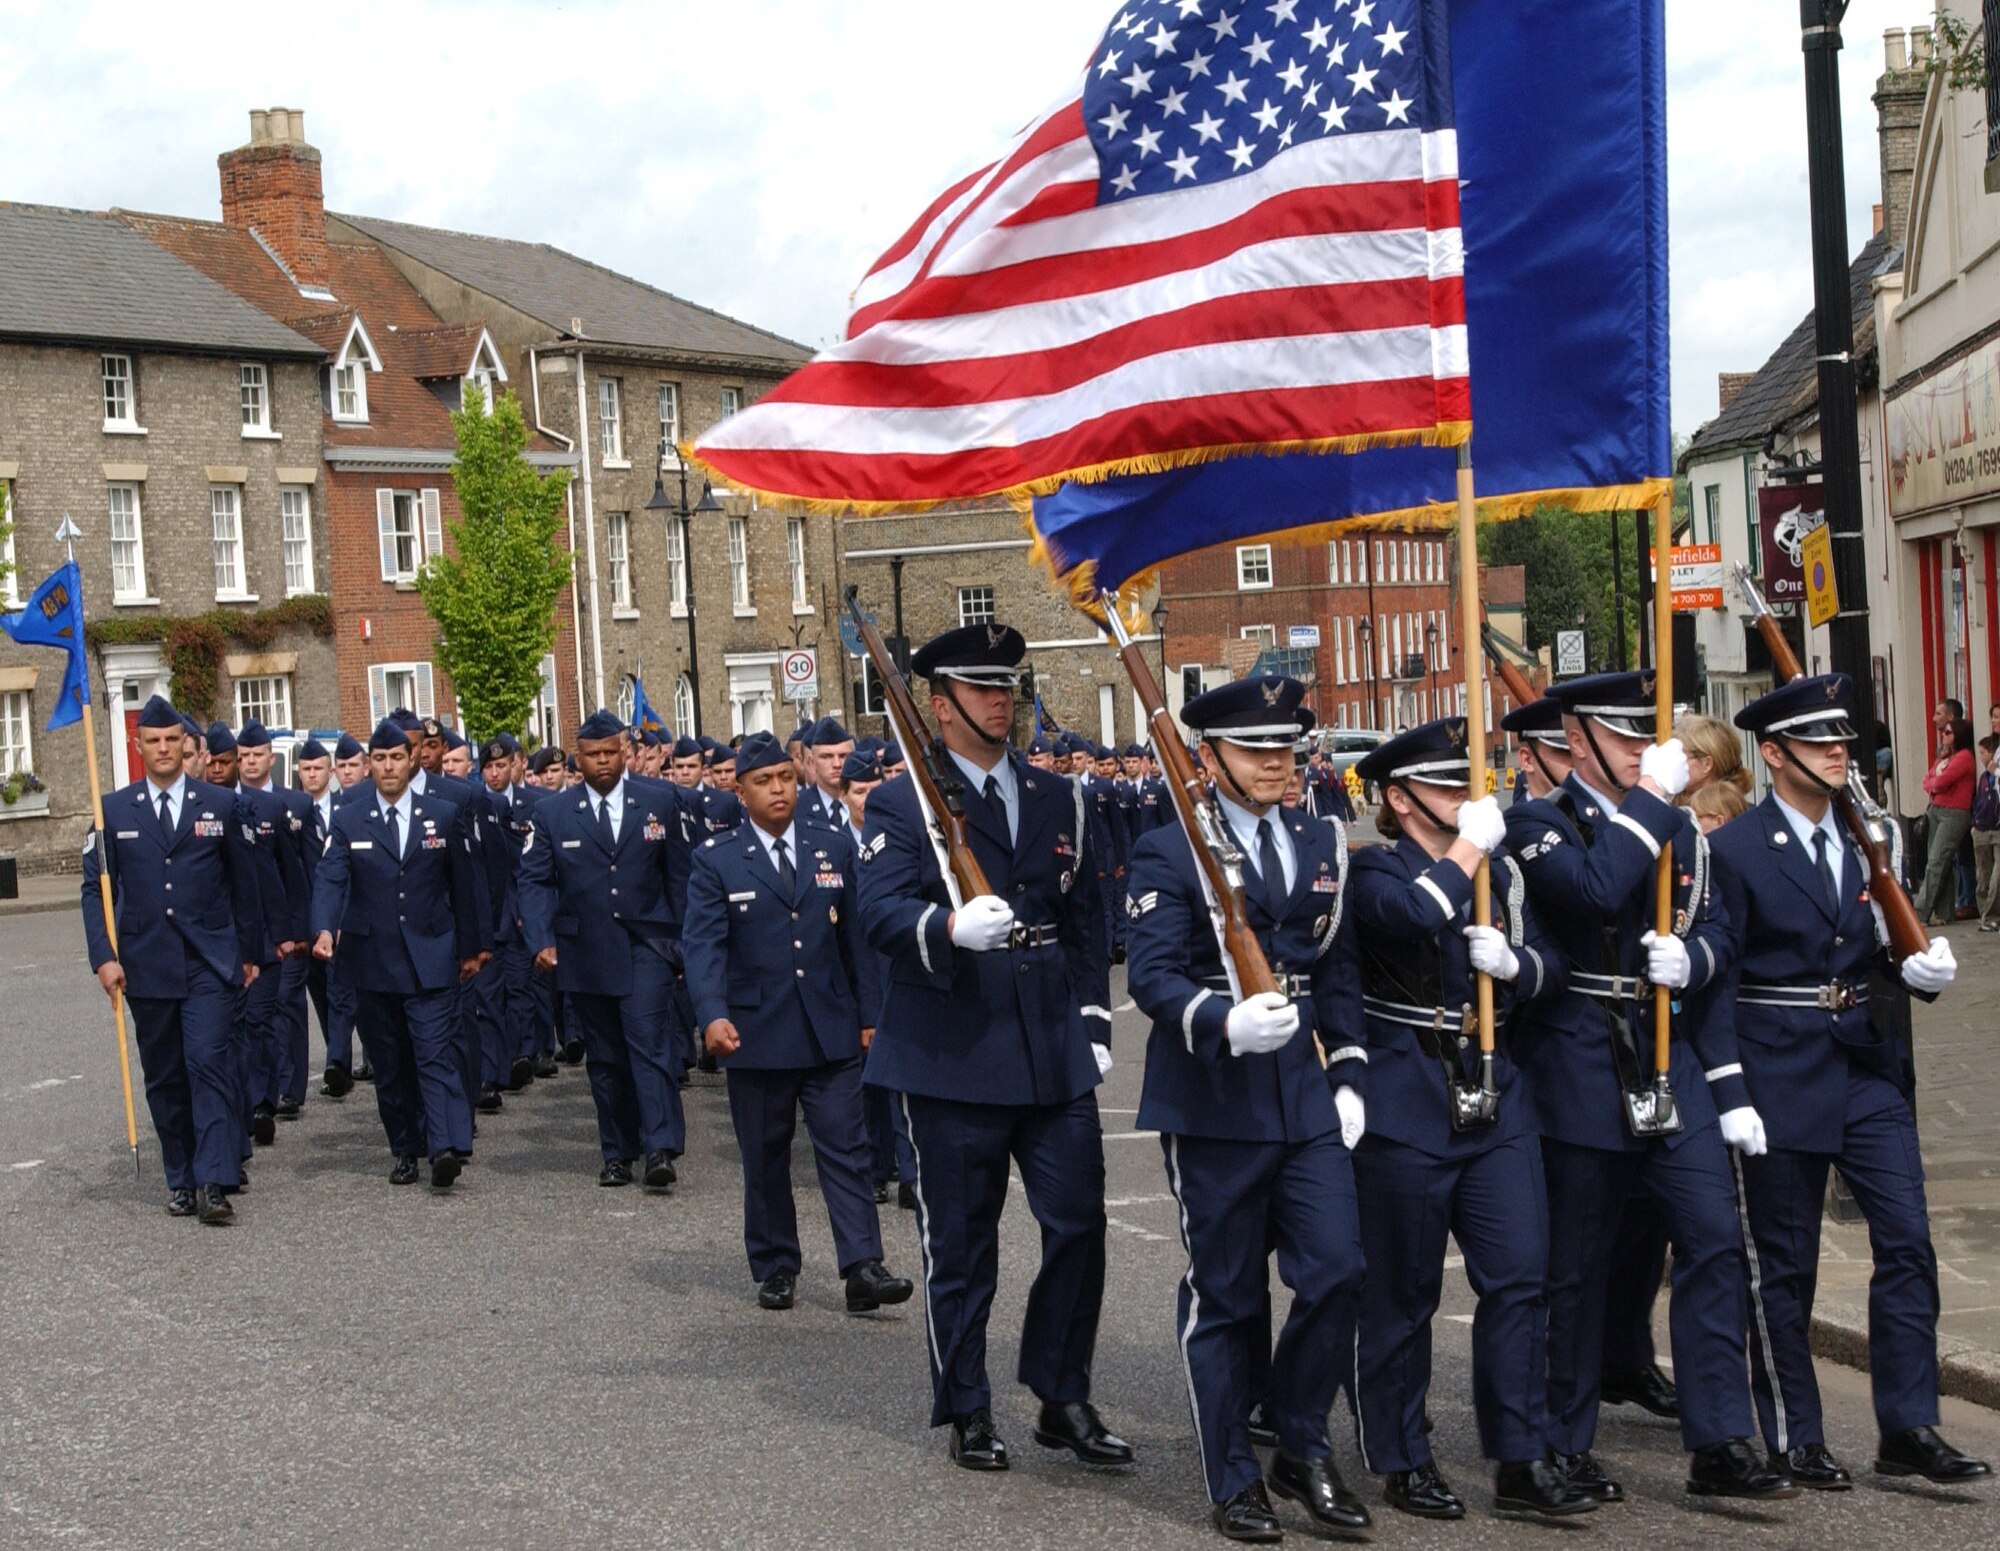 Airmen from RAFs Mildenhall and Lakenheath march in the Bury St. Edmunds America 400 parade May 6, 2007. (U.S Air Force photo by Airman Brad Smith)  